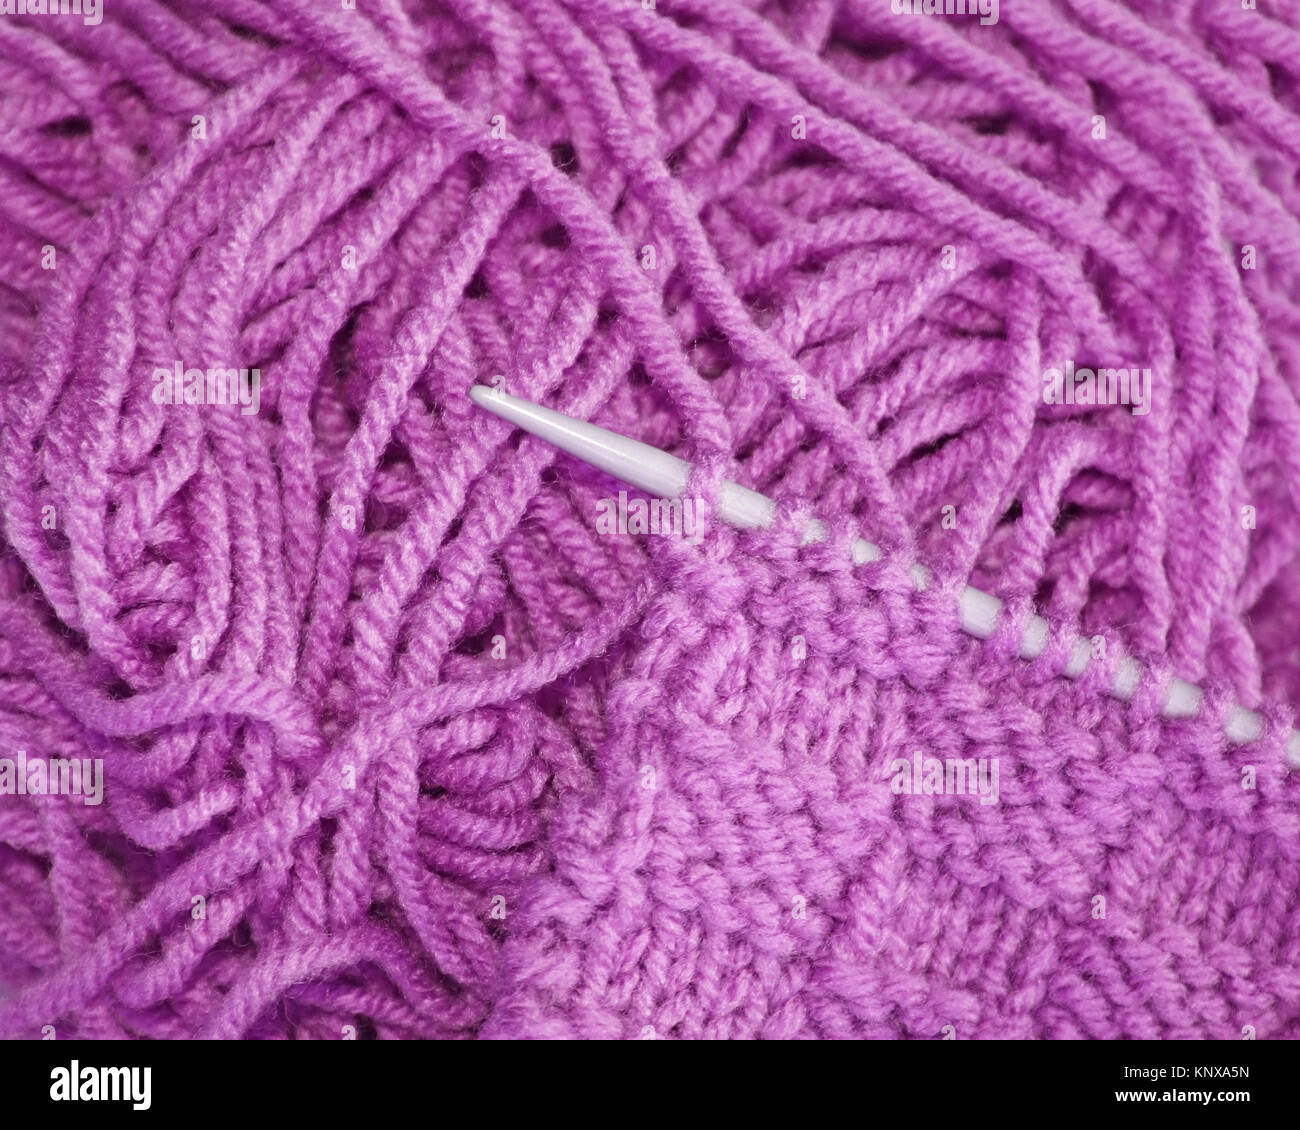 Knitted stitches on knitting needle with strands of lilac colored yarn in background Stock Photo